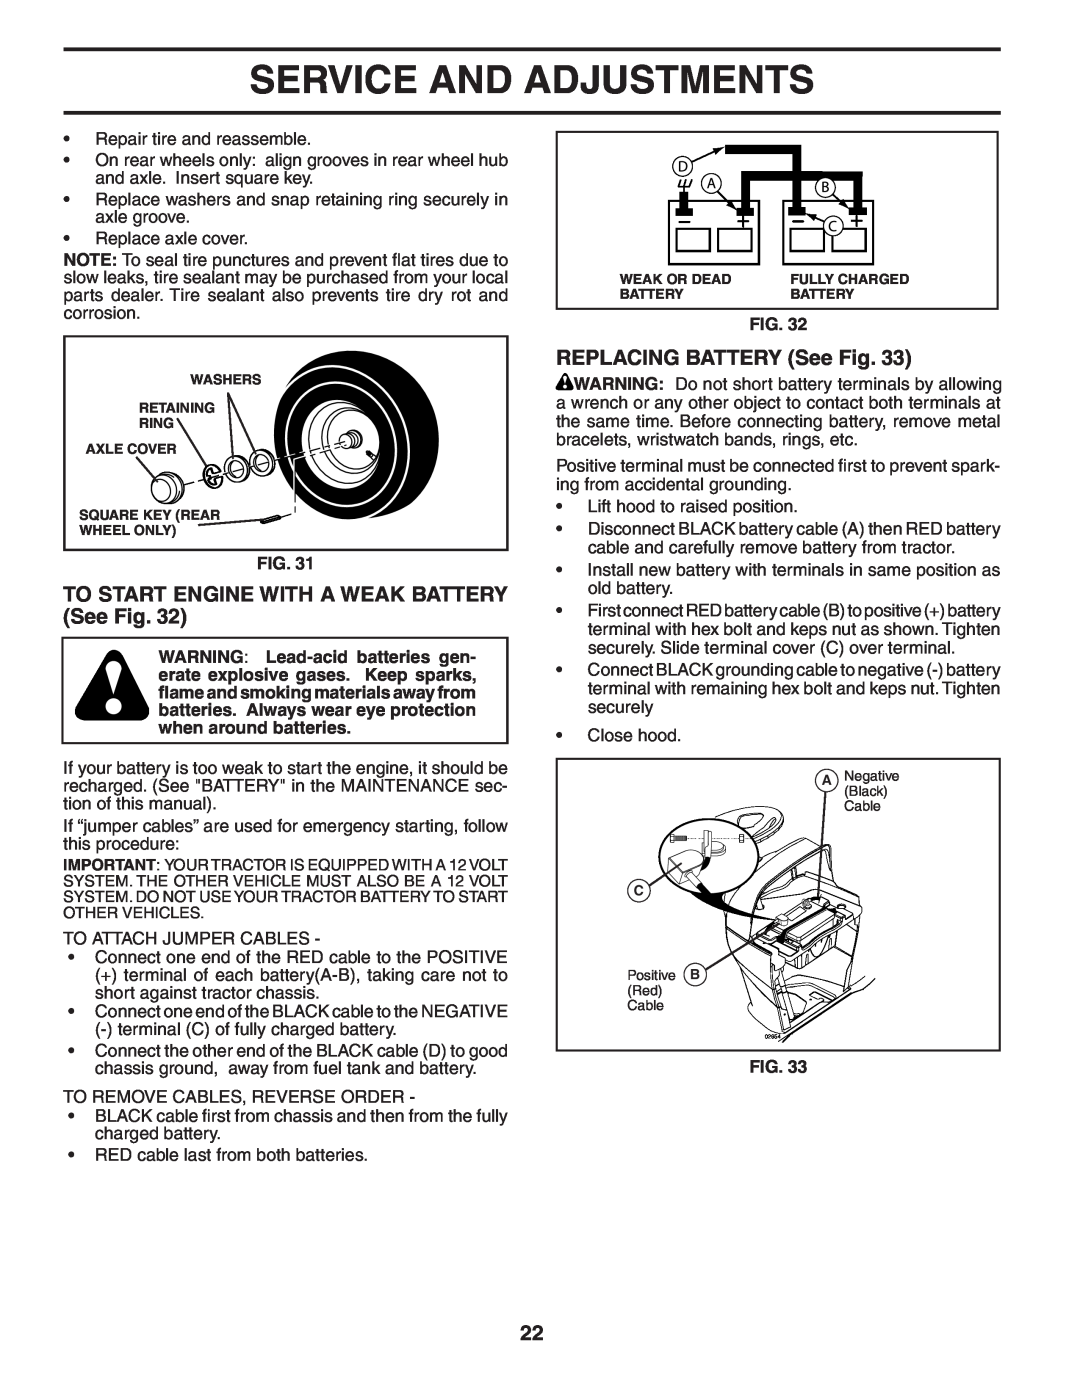 Poulan 404489 manual TO START ENGINE WITH A WEAK BATTERY See Fig, REPLACING BATTERY See Fig, Service And Adjustments 